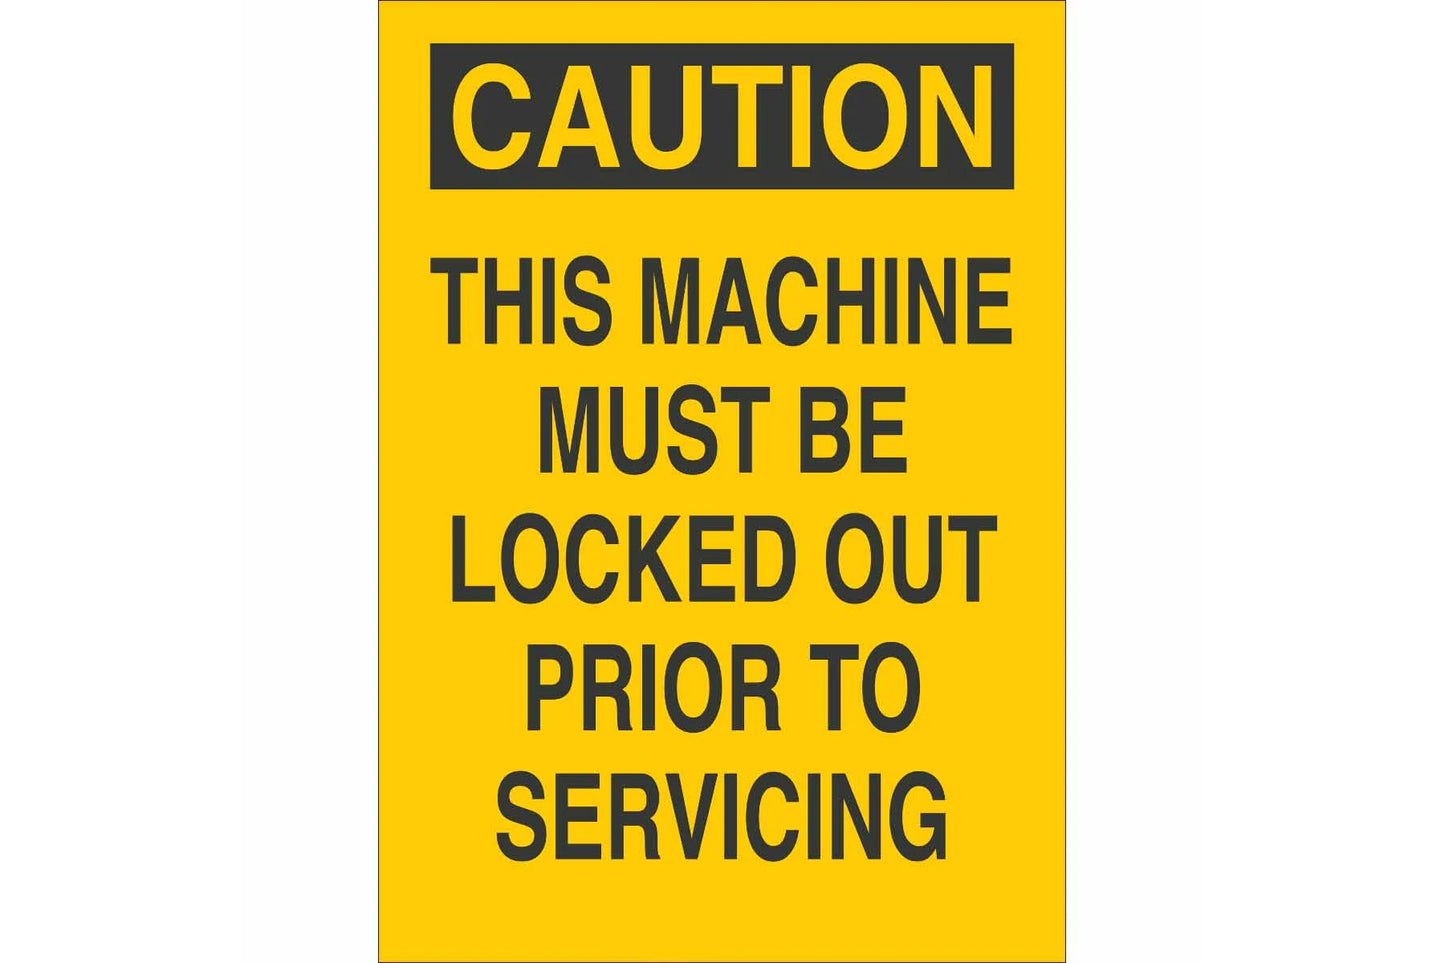 CAUTION This Machine Must Be Locked Out Prior To Servicing Sign